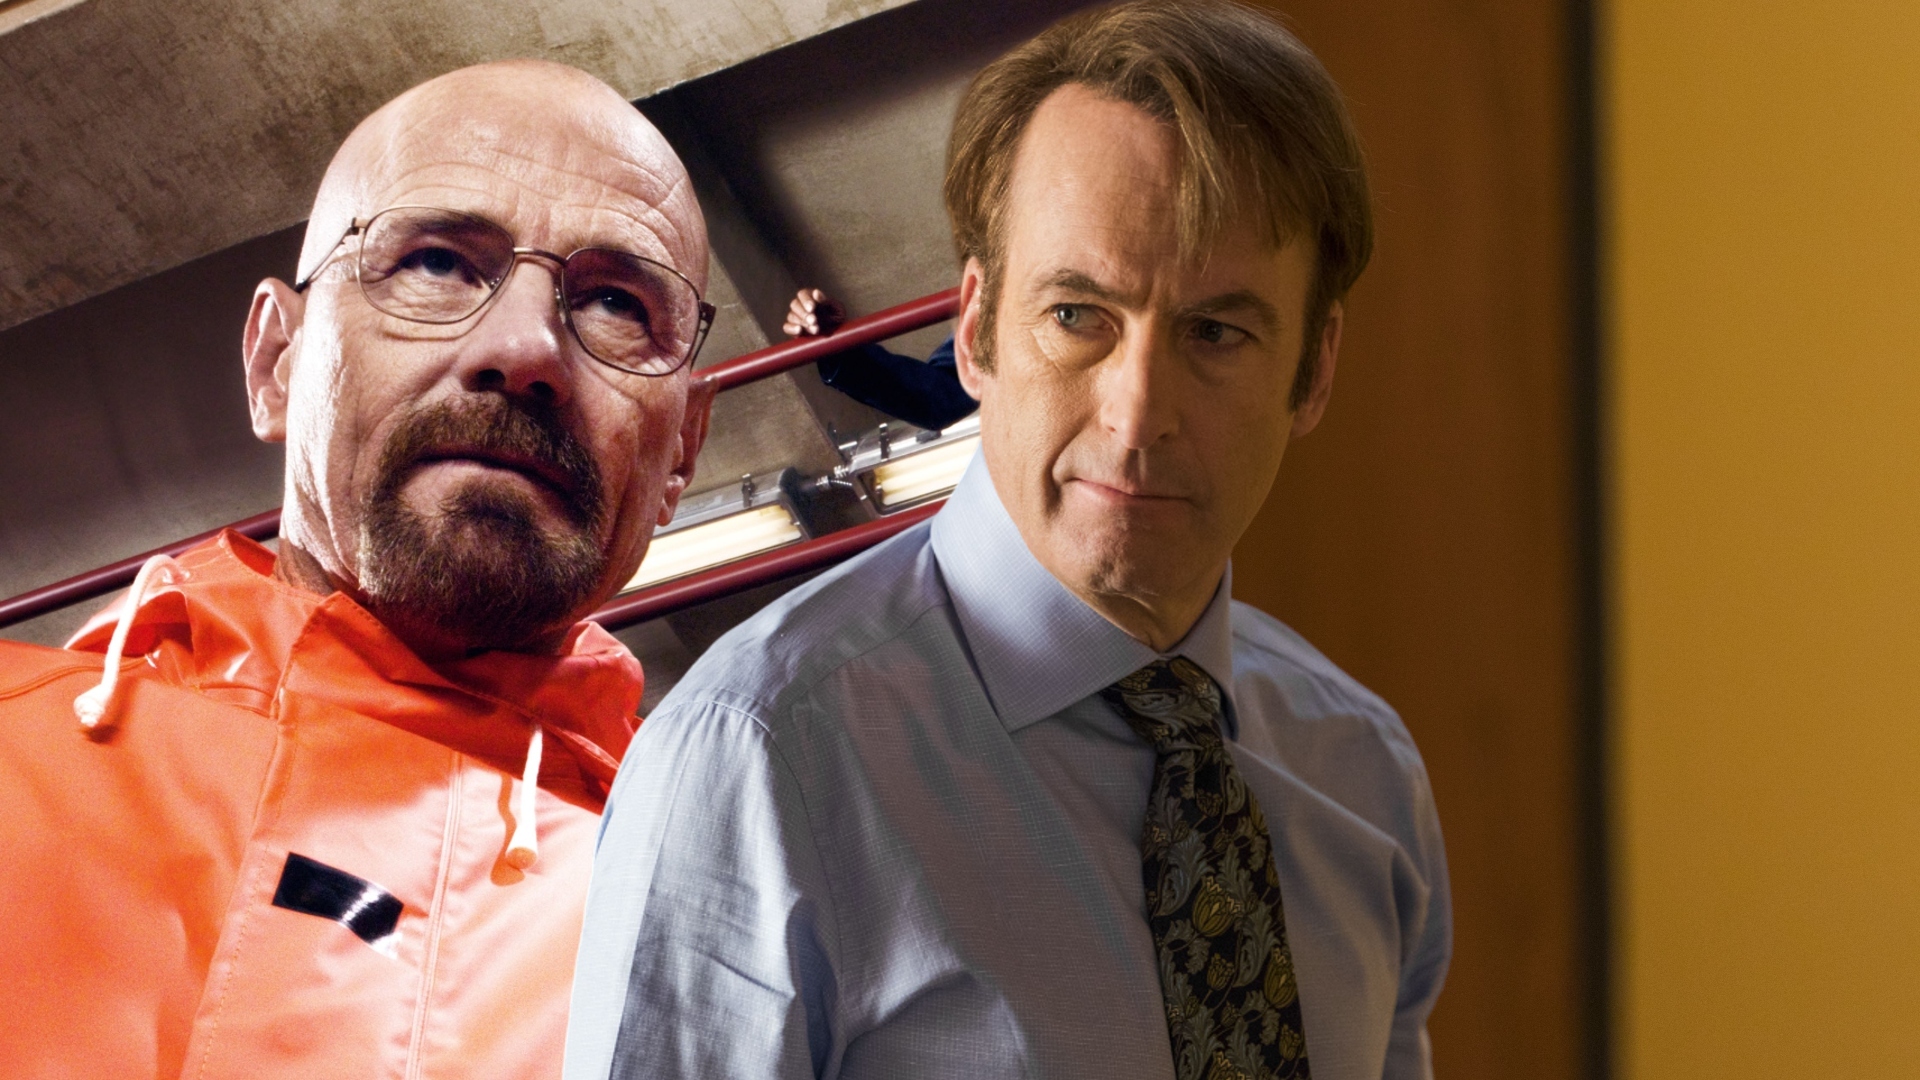 Most Surprising Breaking Bad Easter Eggs Found in Better Call Saul